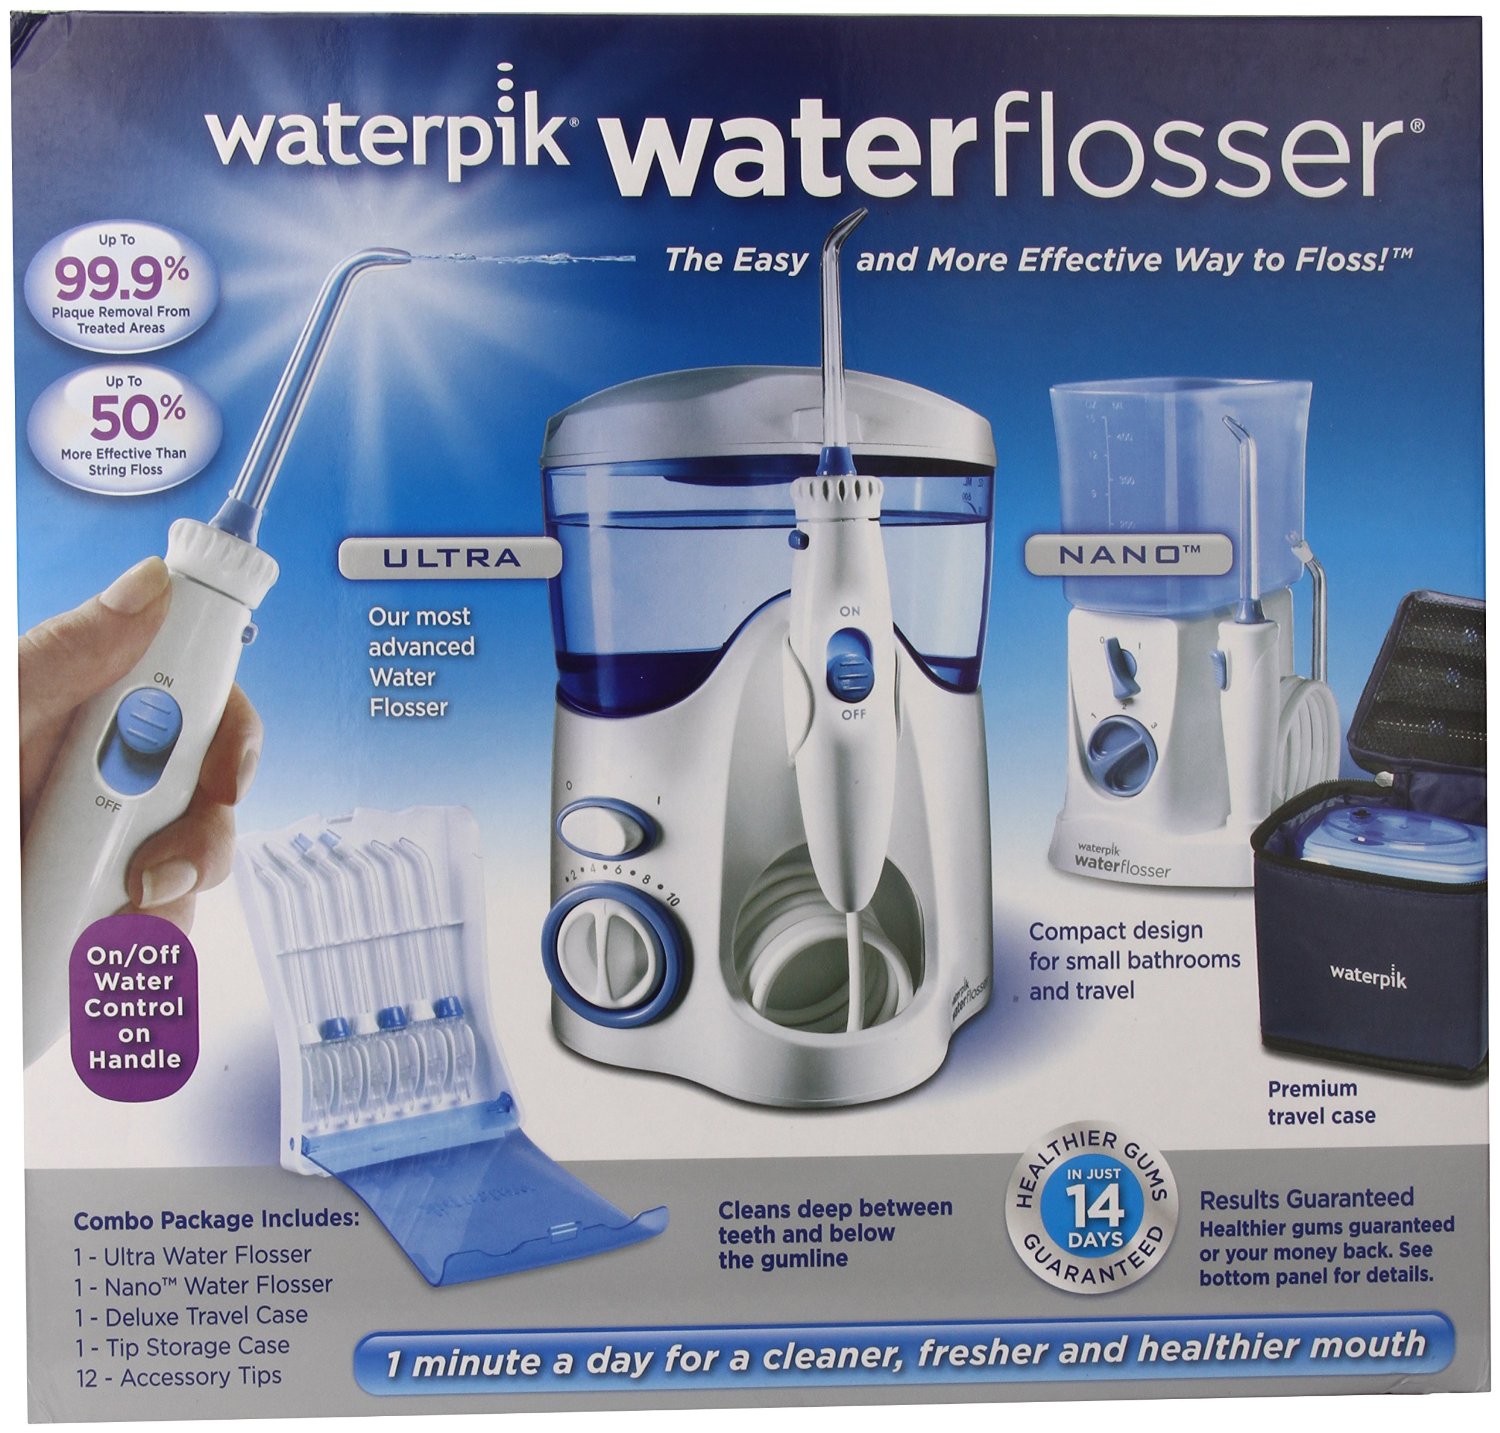 Waterpik Water Flosser Tip Storage Case and Accessory Tips Combo Pack